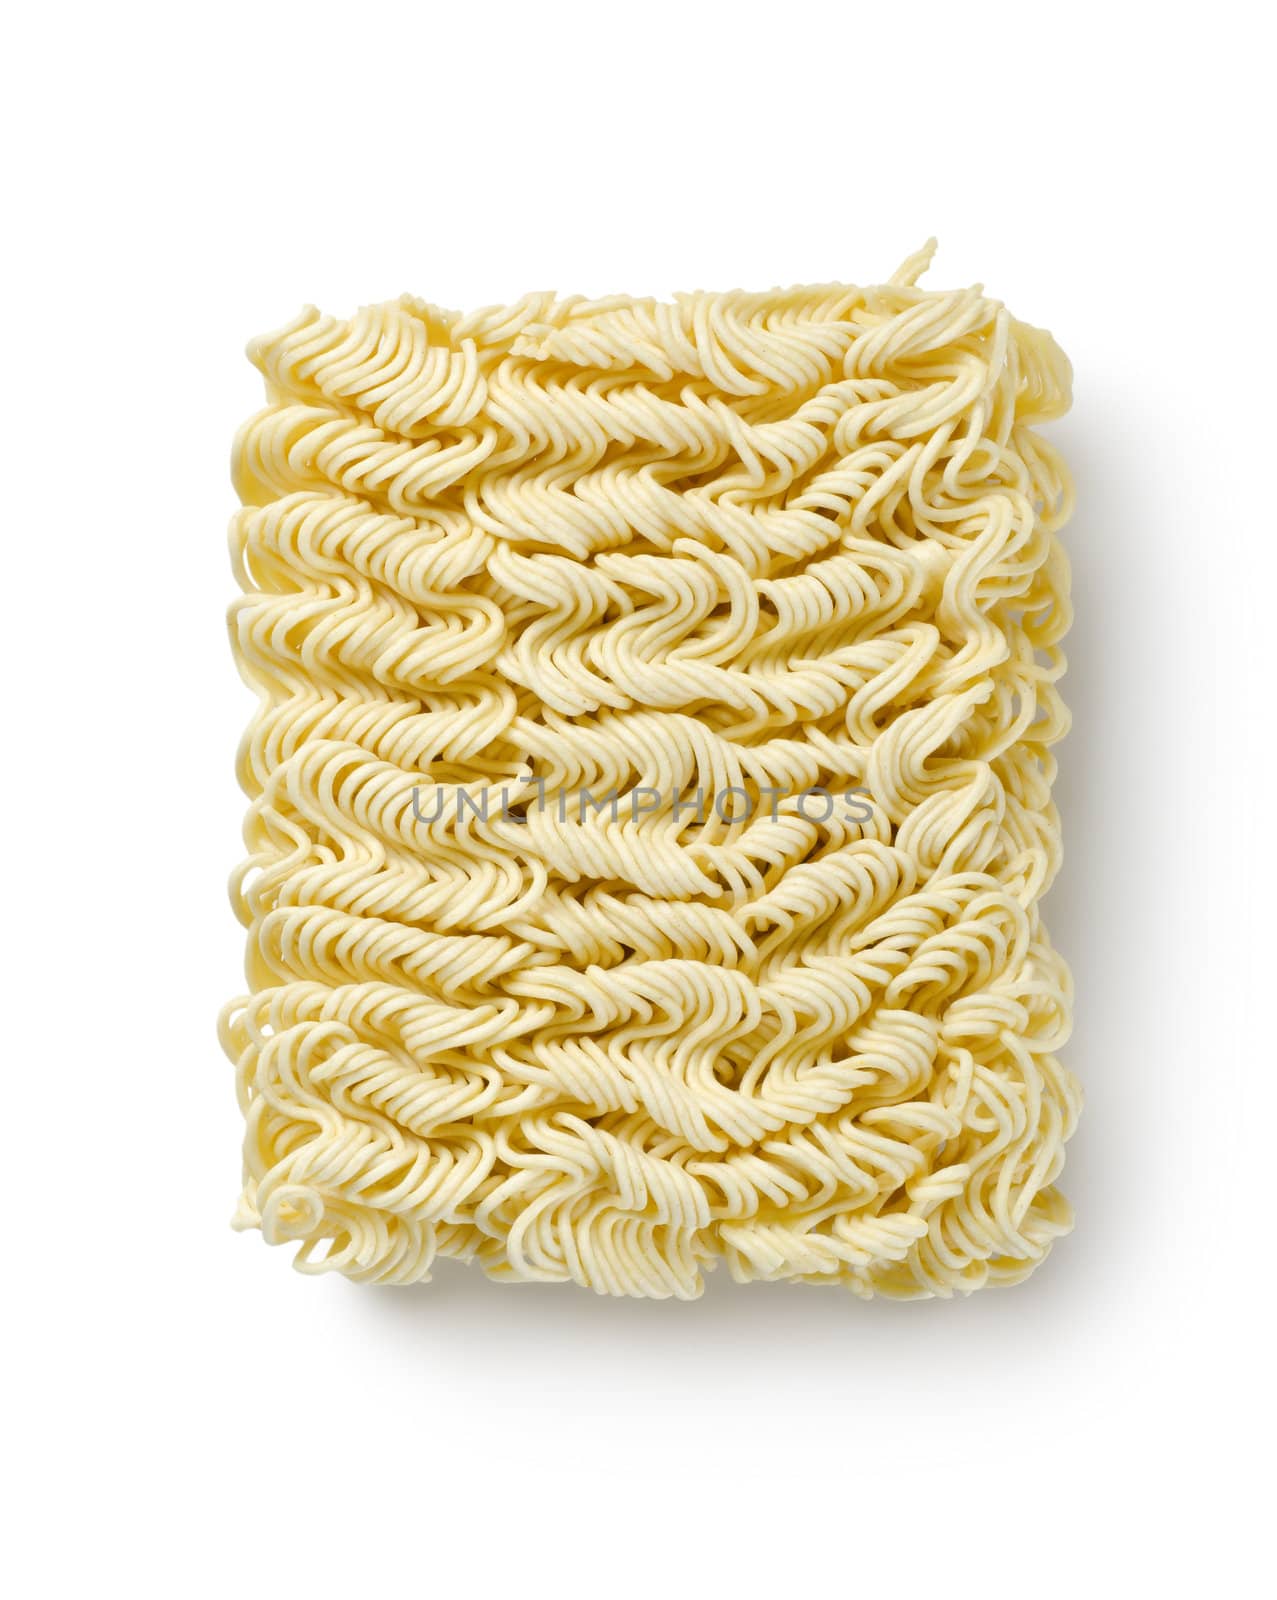 Noodles of fast preparation isolated on a white background